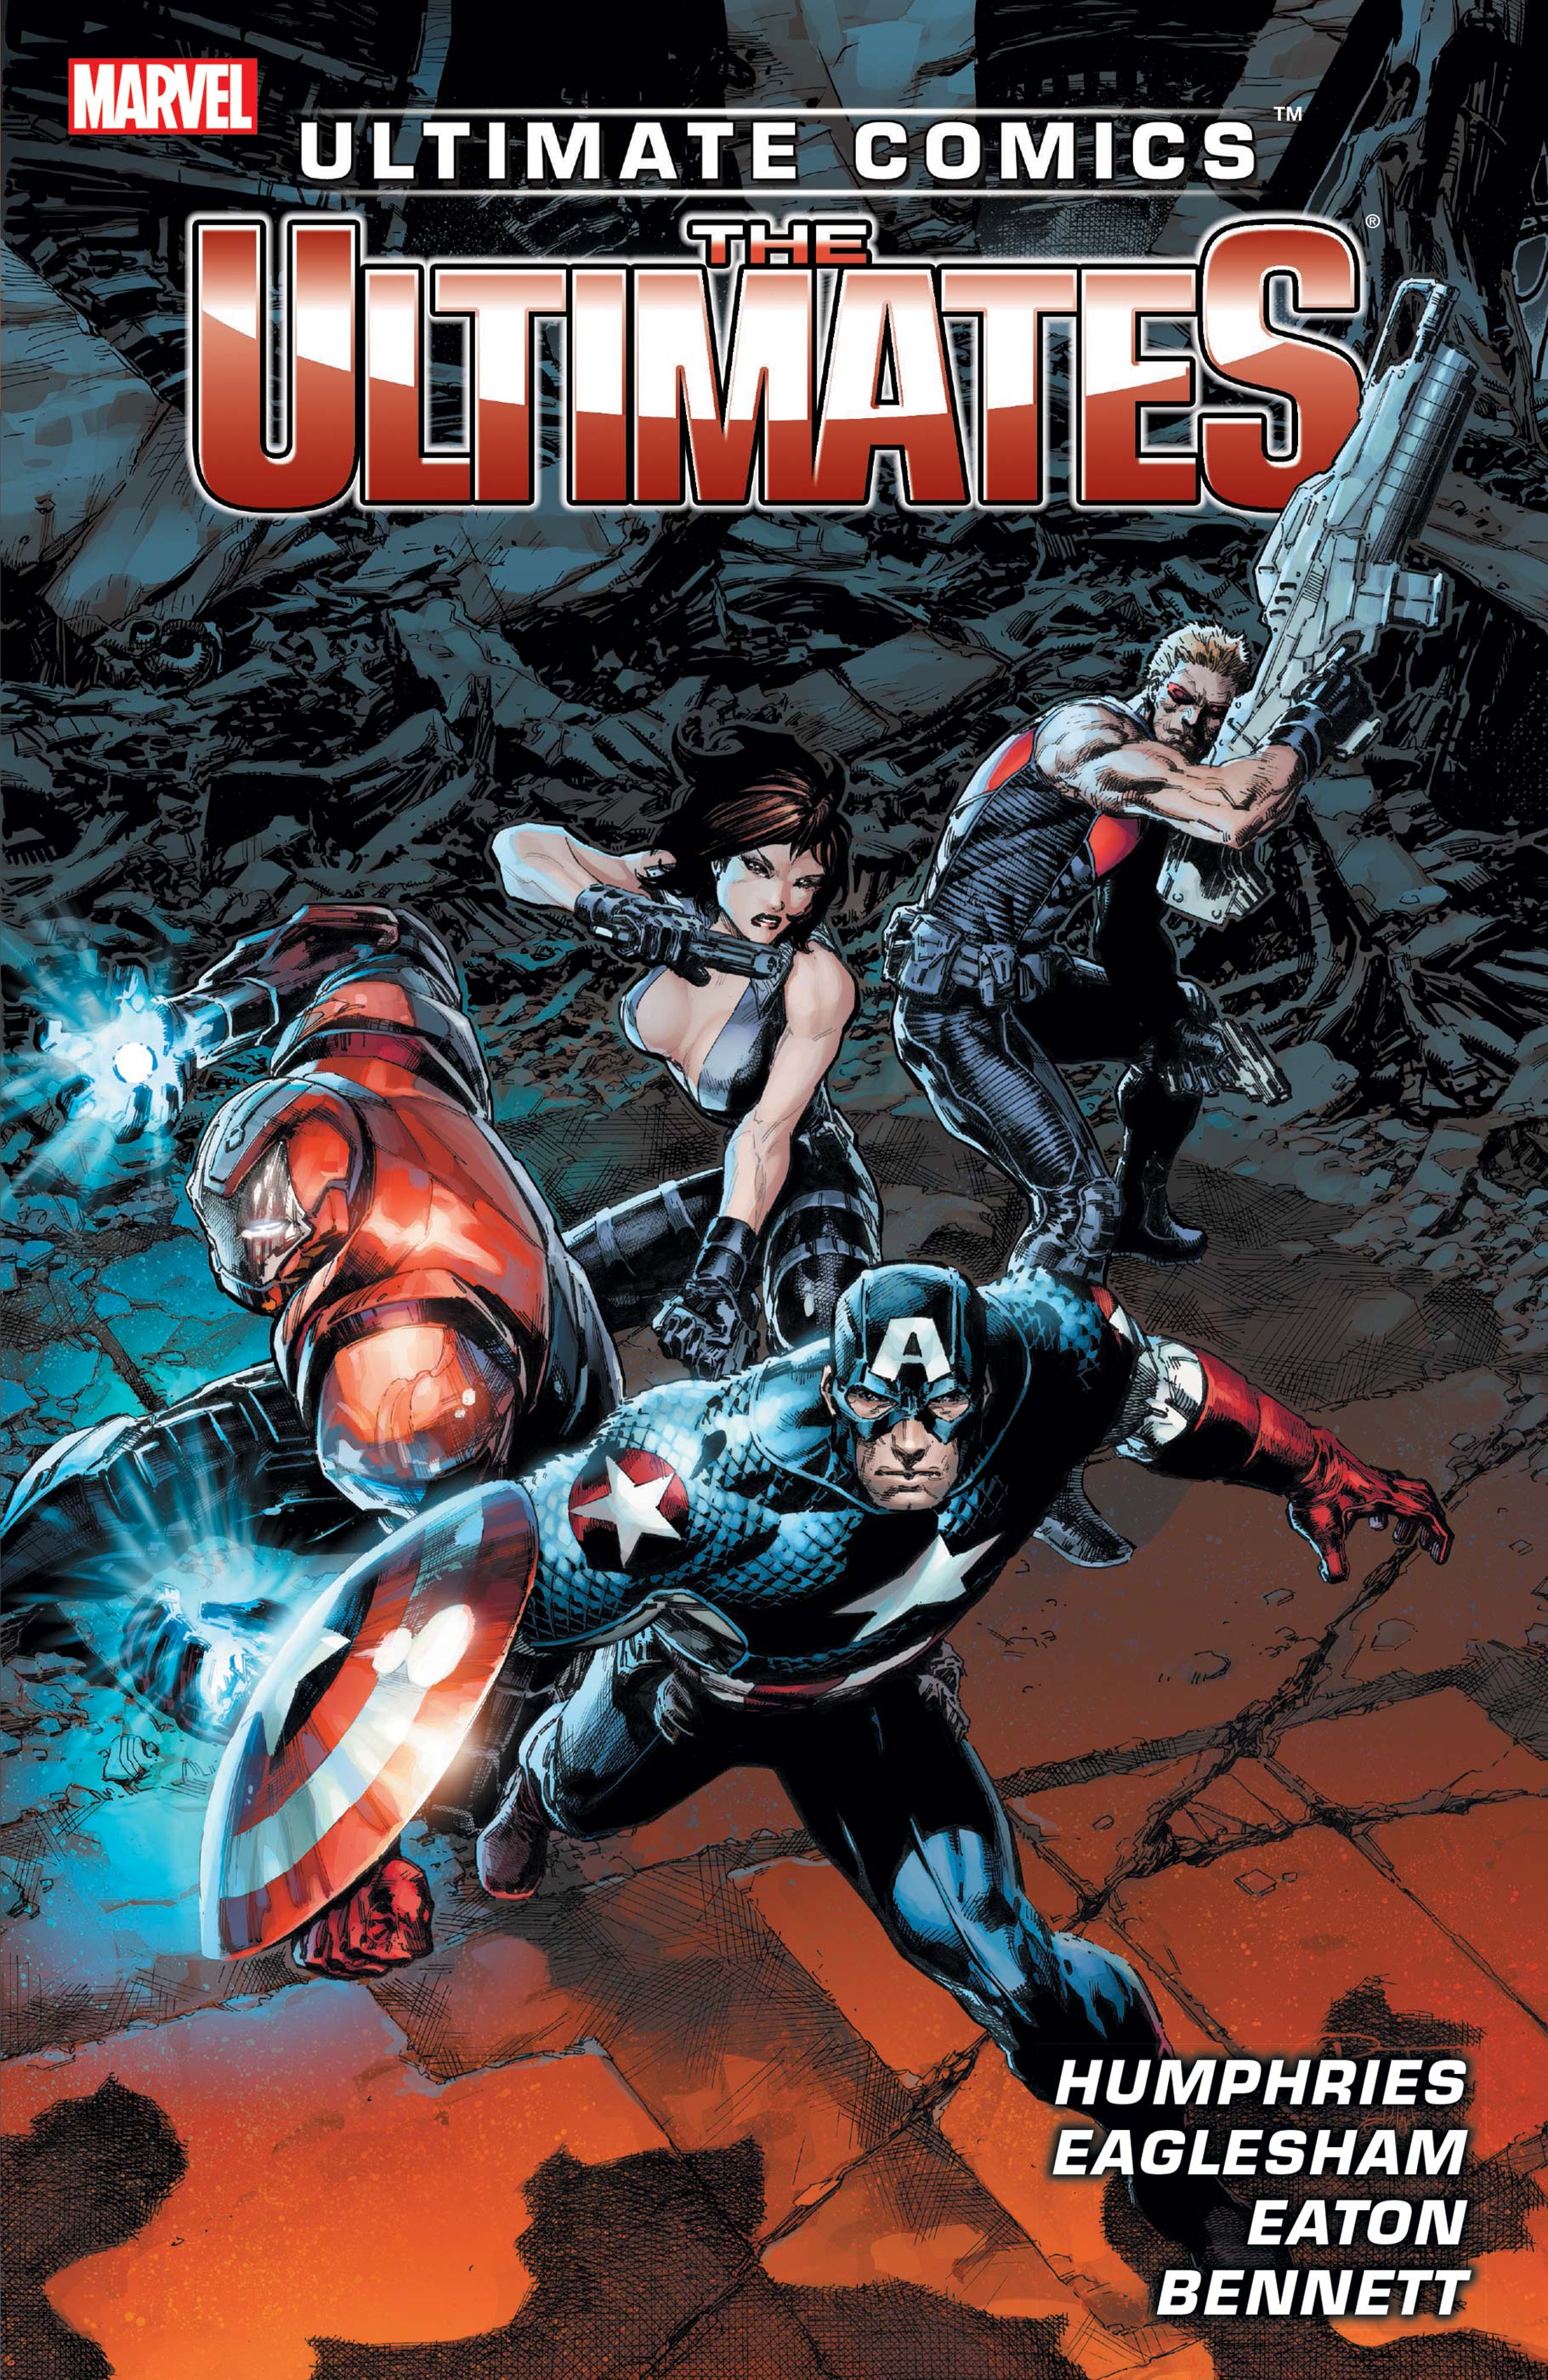 ULTIMATE COMICS ULTIMATES BY SAM HUMPHRIES VOL. 1 TPB (Trade Paperback)